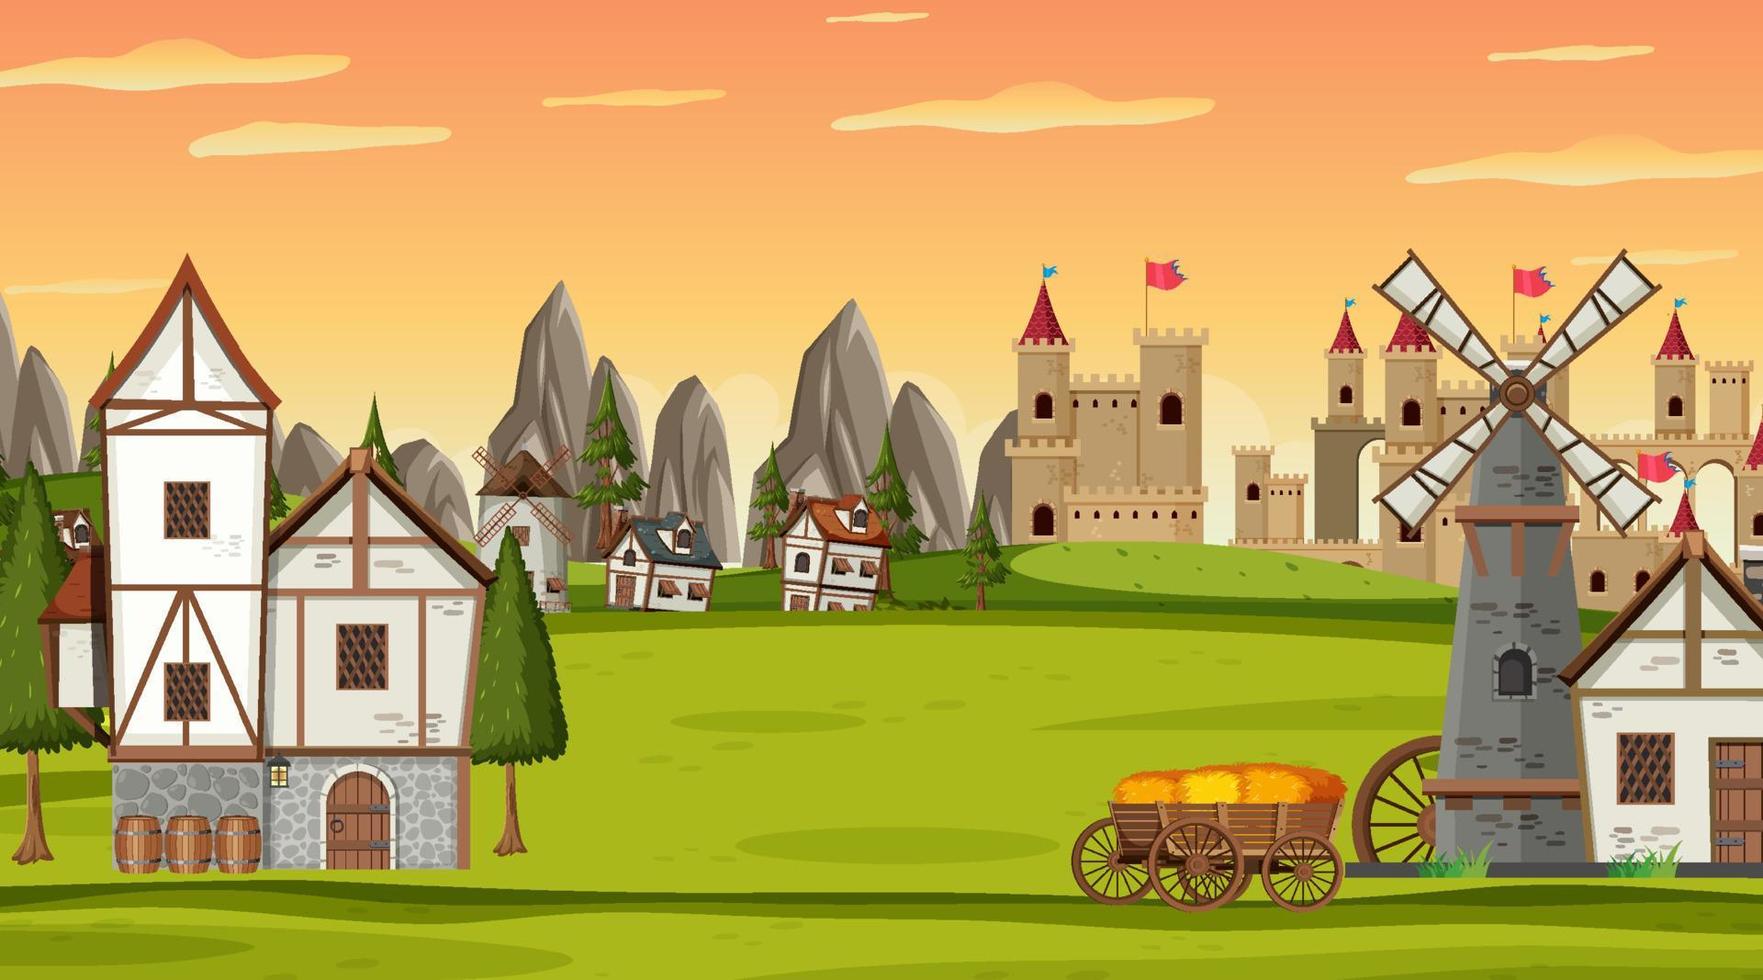 Medieval town scene in cartoon style vector